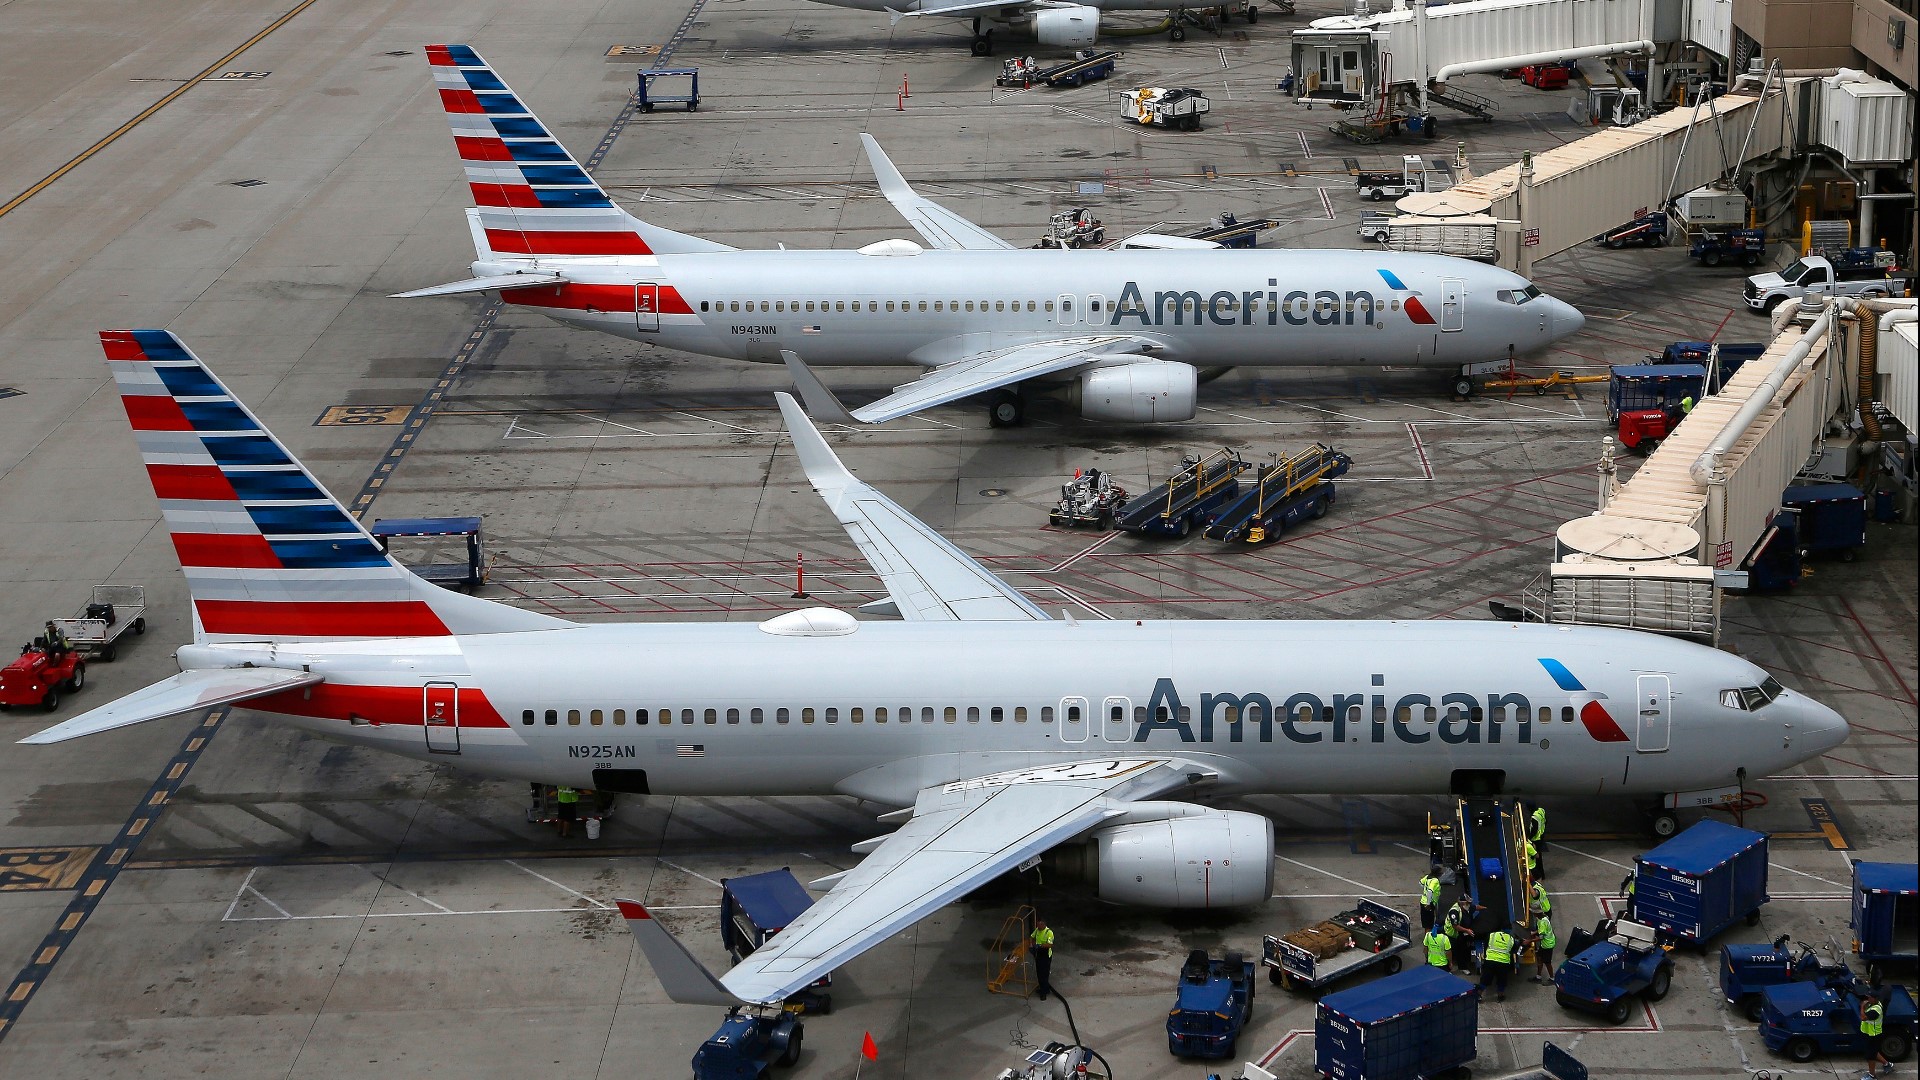 A second American Airlines employee has died after contracting COVID-19, sources tell WFAA.